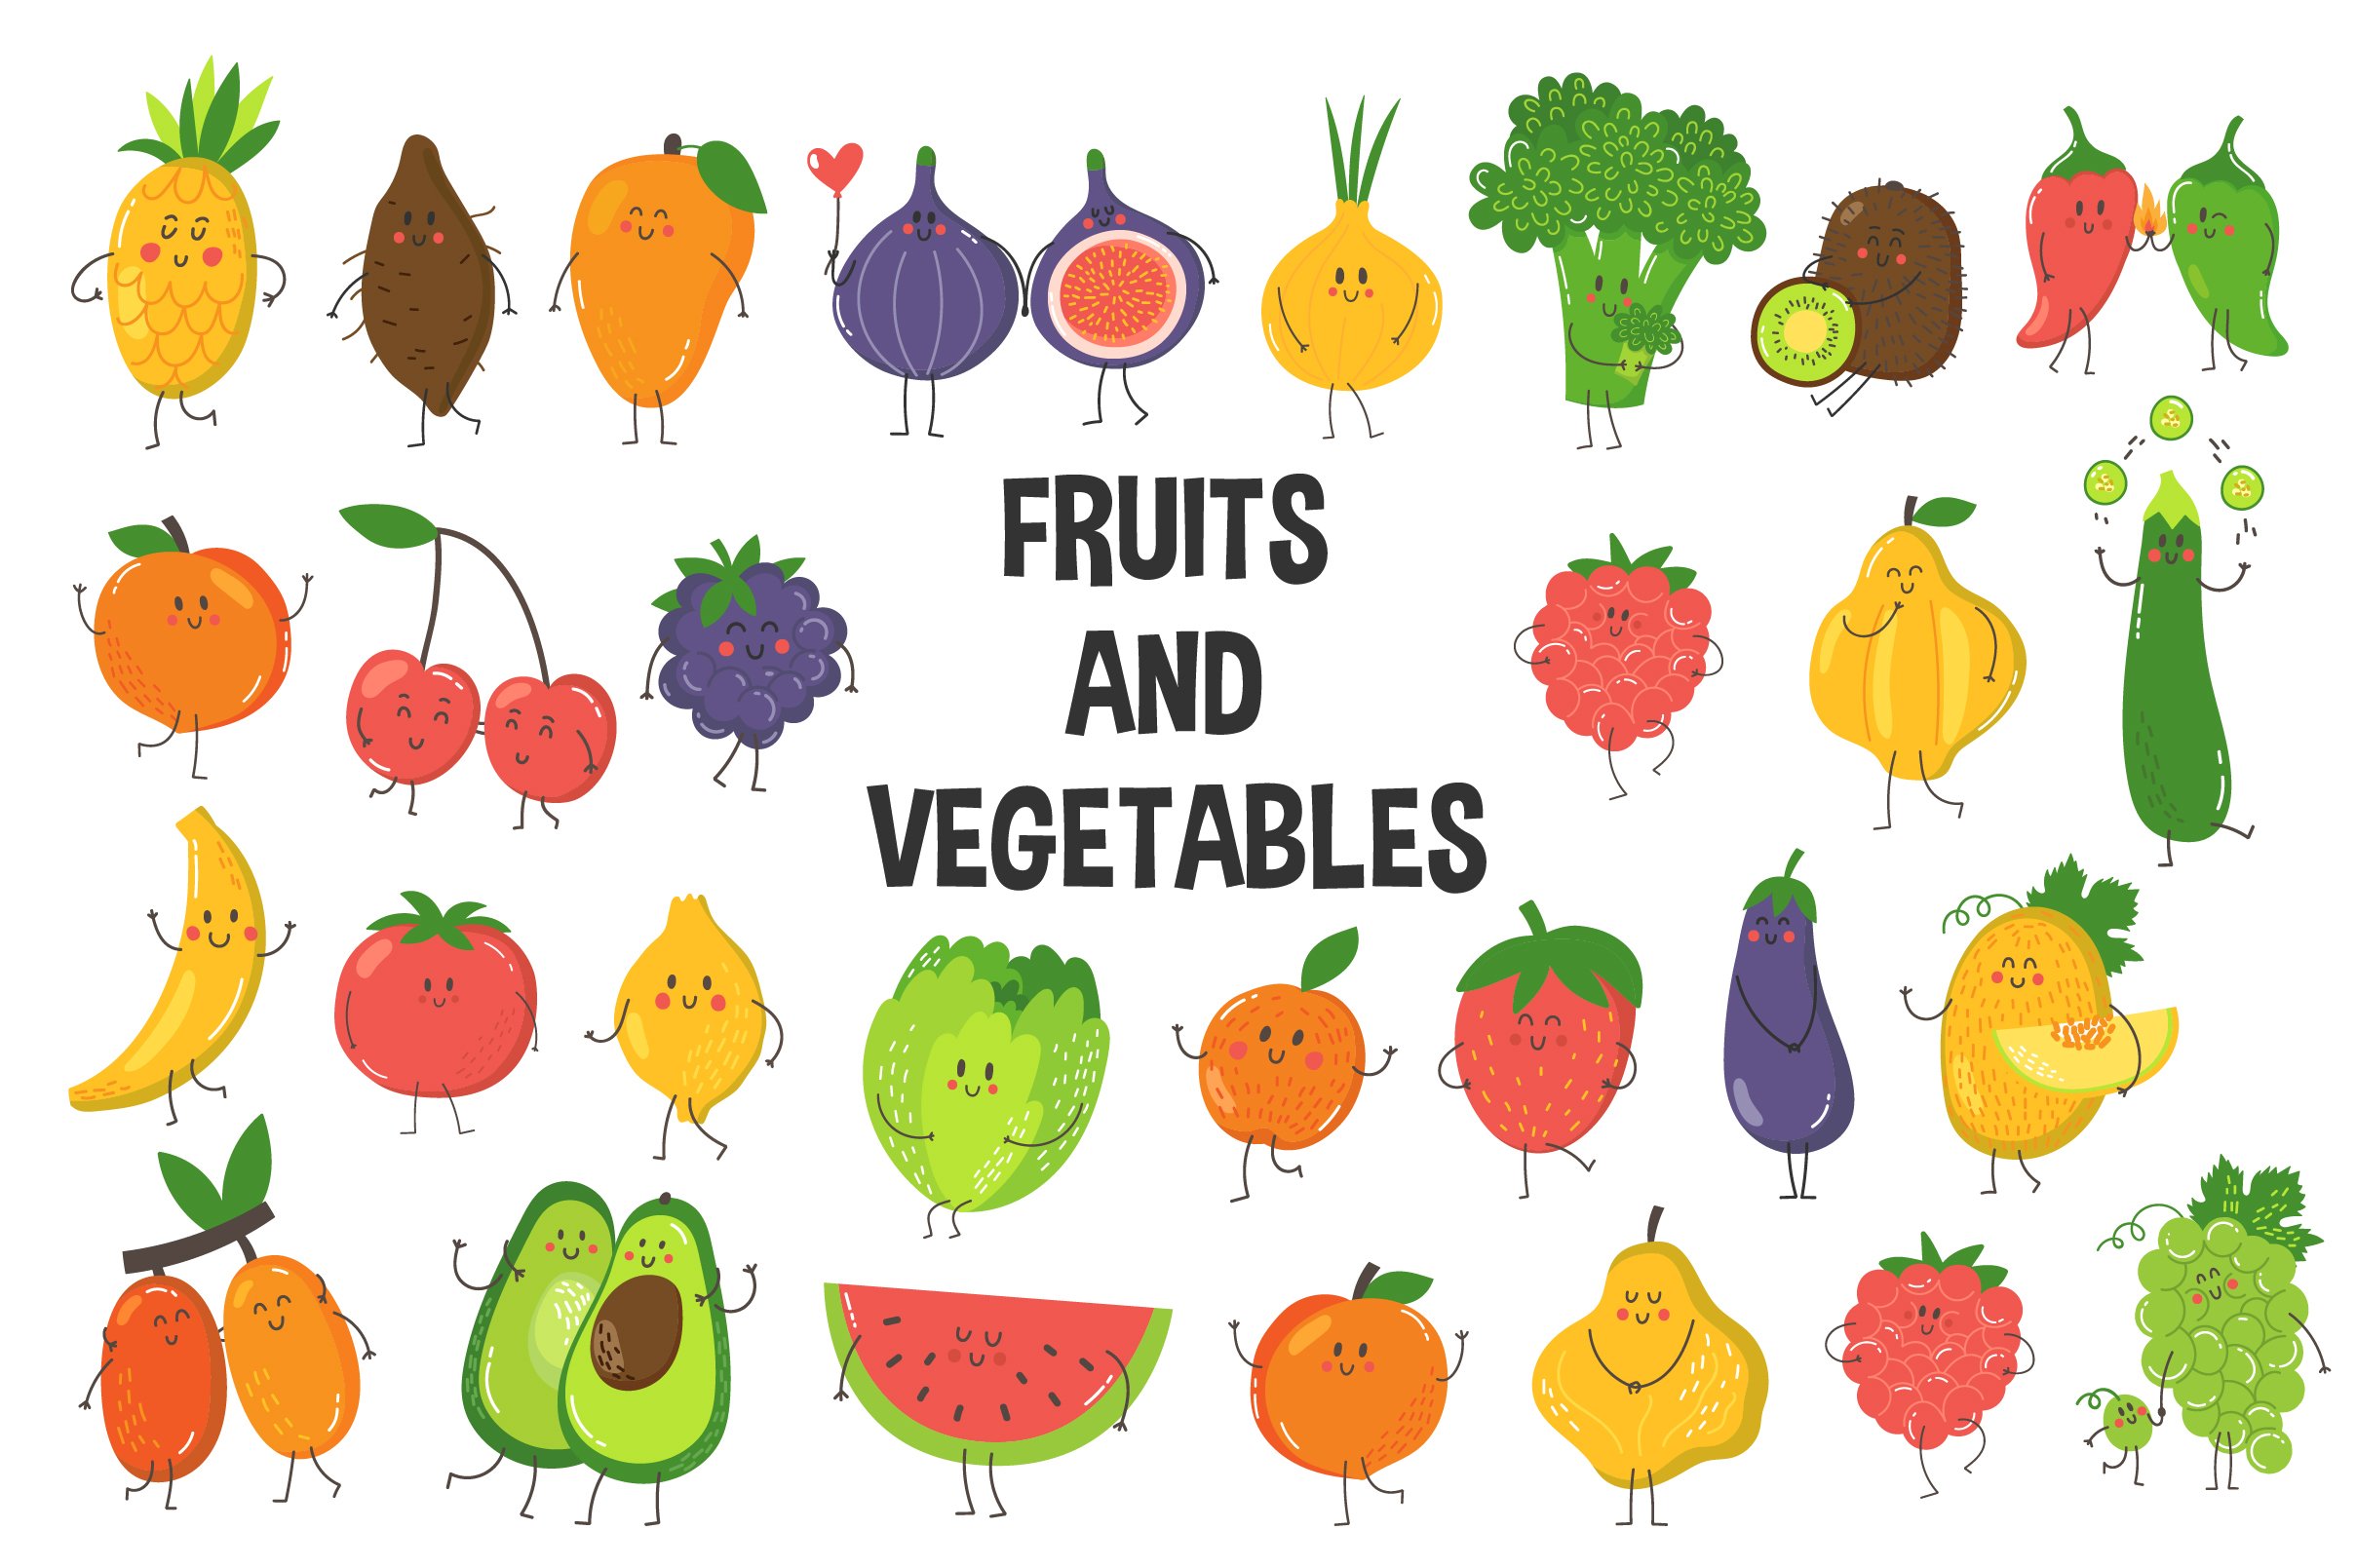 Fruits and vegetables set cover image.